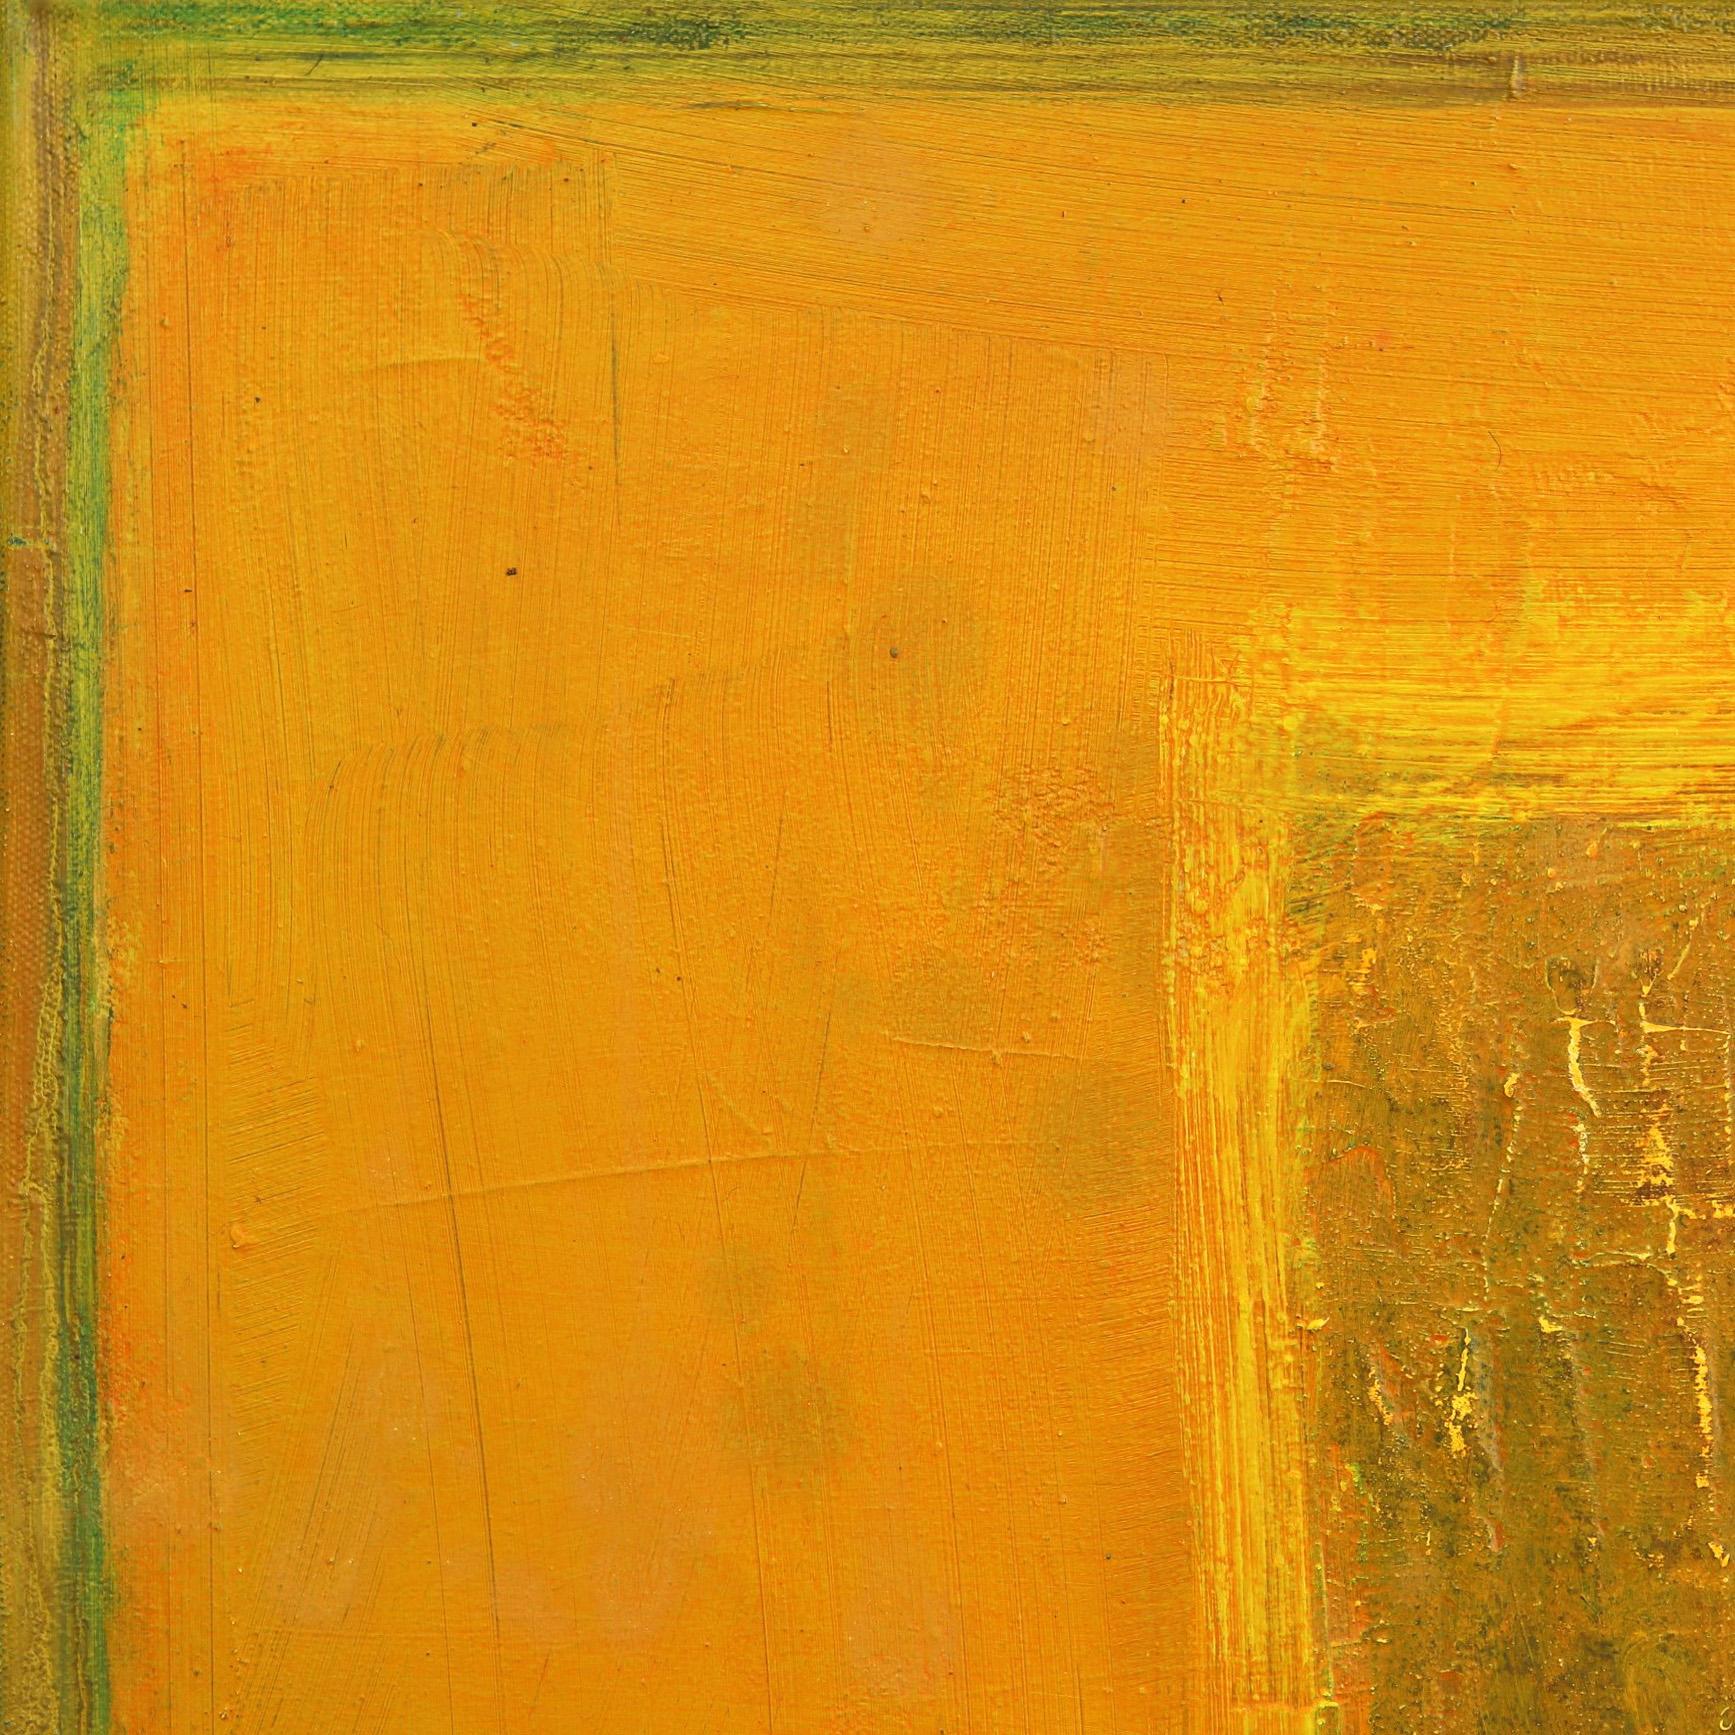 AWH284 - Original Abstract Textured Yellow Expressionist Colorfield Oil Painting - Minimalist Mixed Media Art by Bernhard Zimmer